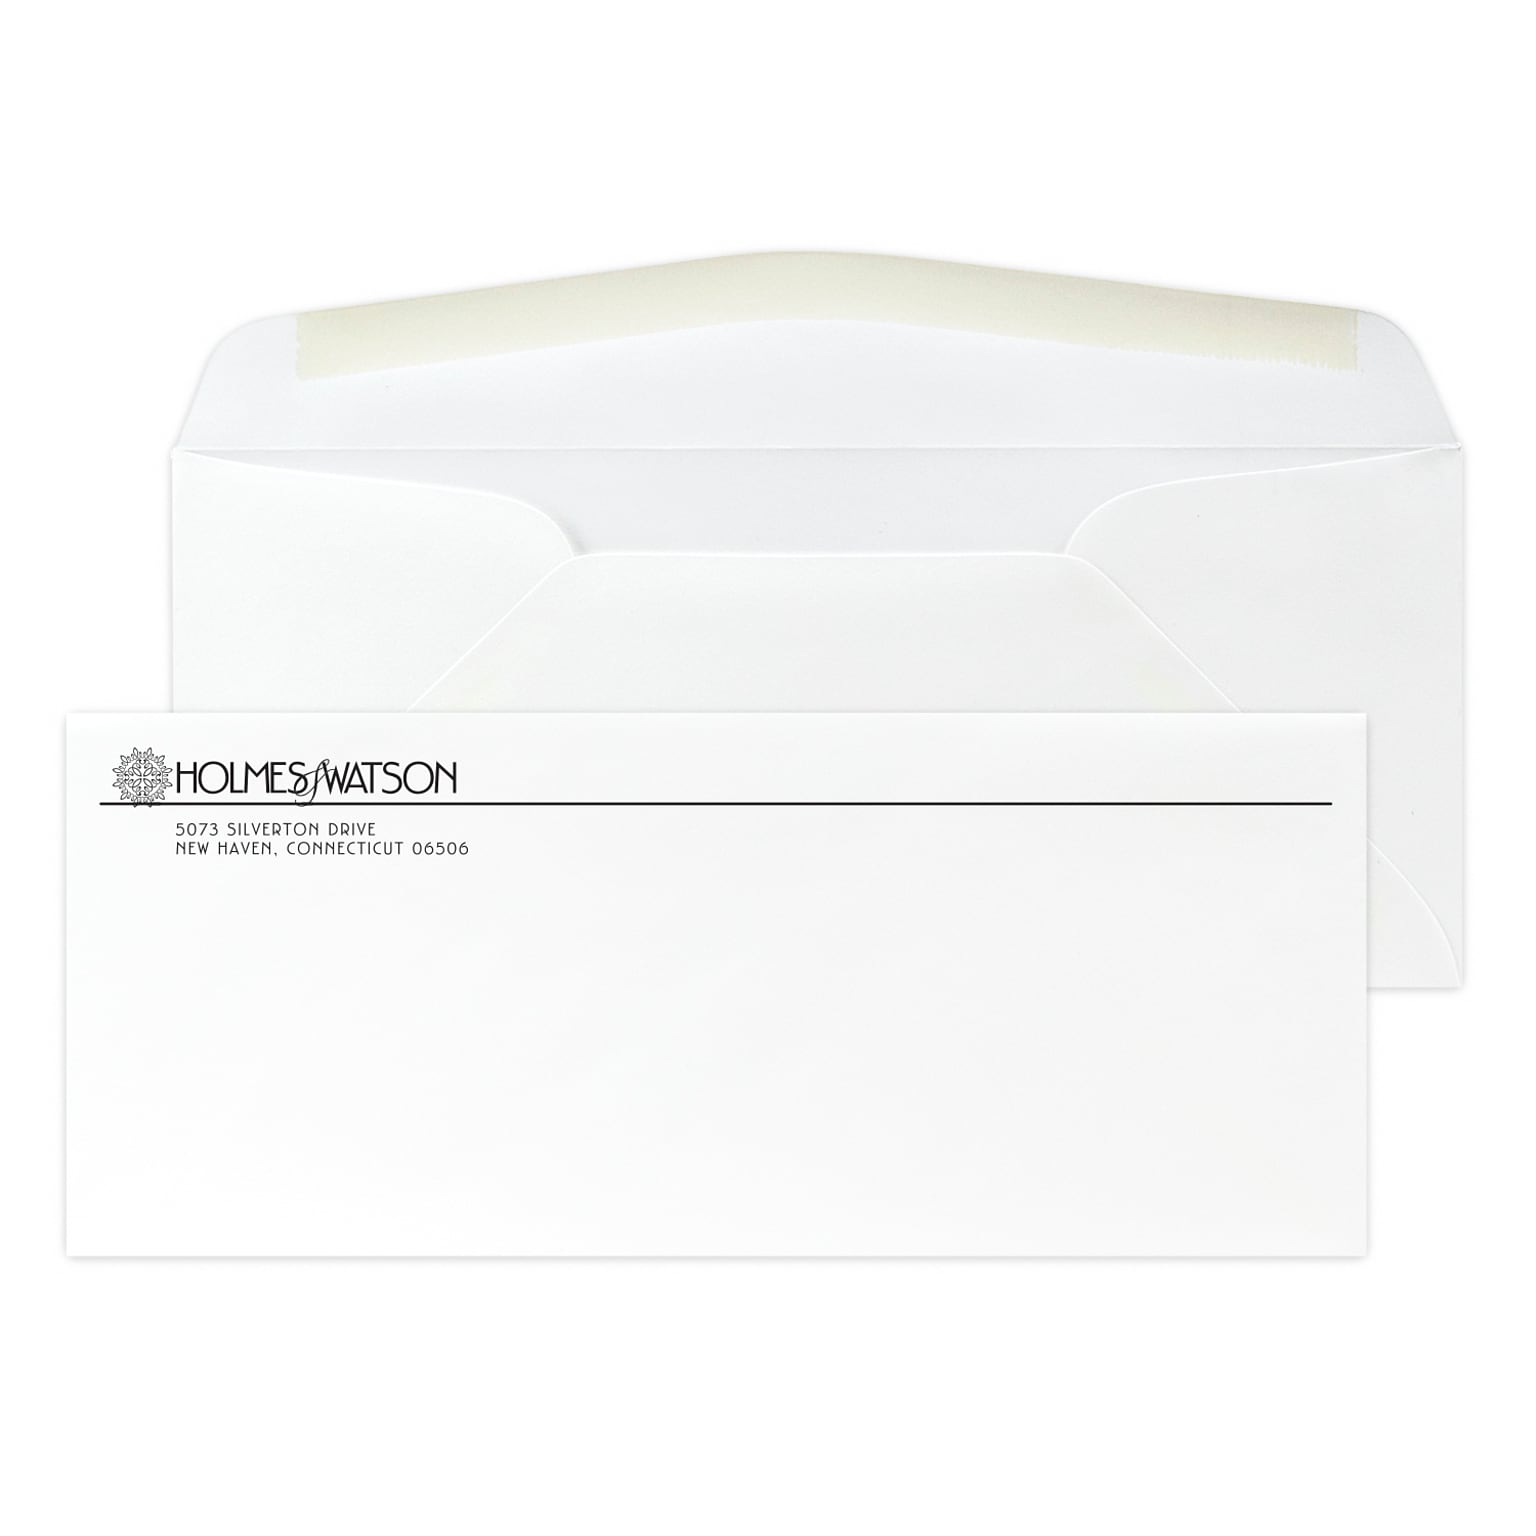 Custom #10 Stationery Envelopes, 4 1/4 x 9 1/2, 70# Cougar Opaque Smooth White, 1 Standard Flat Ink, 250 / Pack